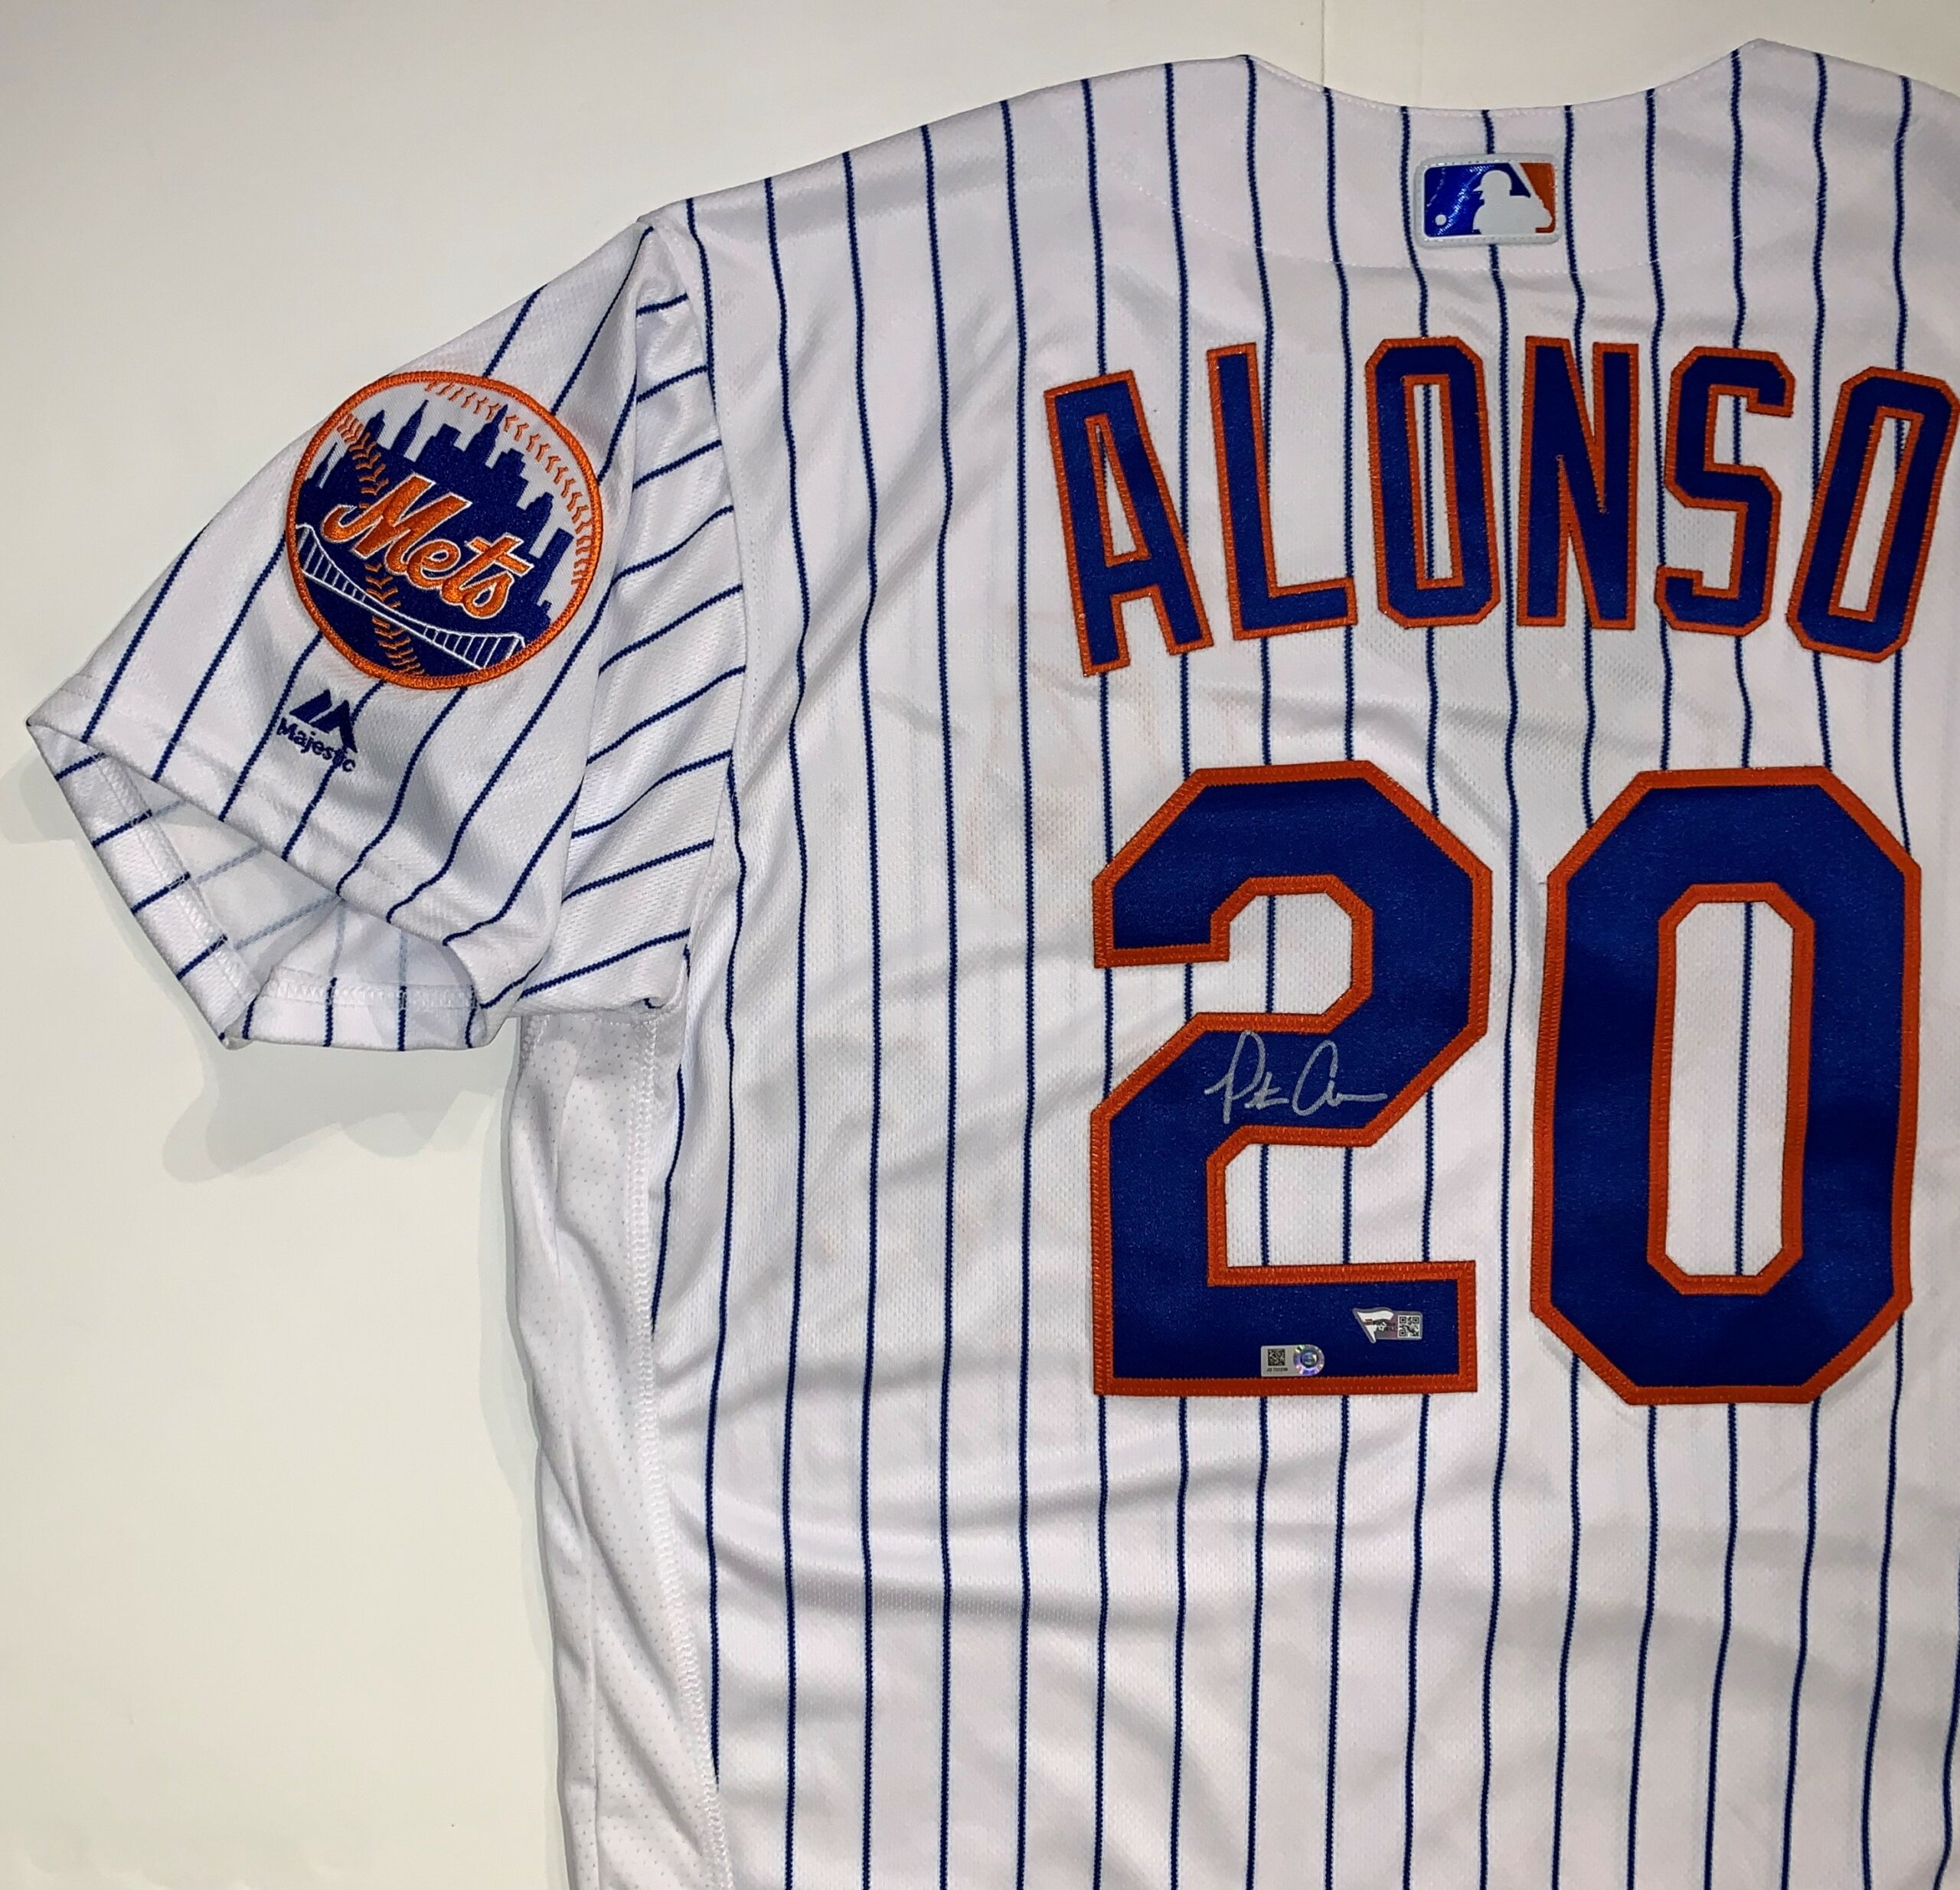 Pete Alonso Autographed Mets Authentic Jersey - Rookie Signature